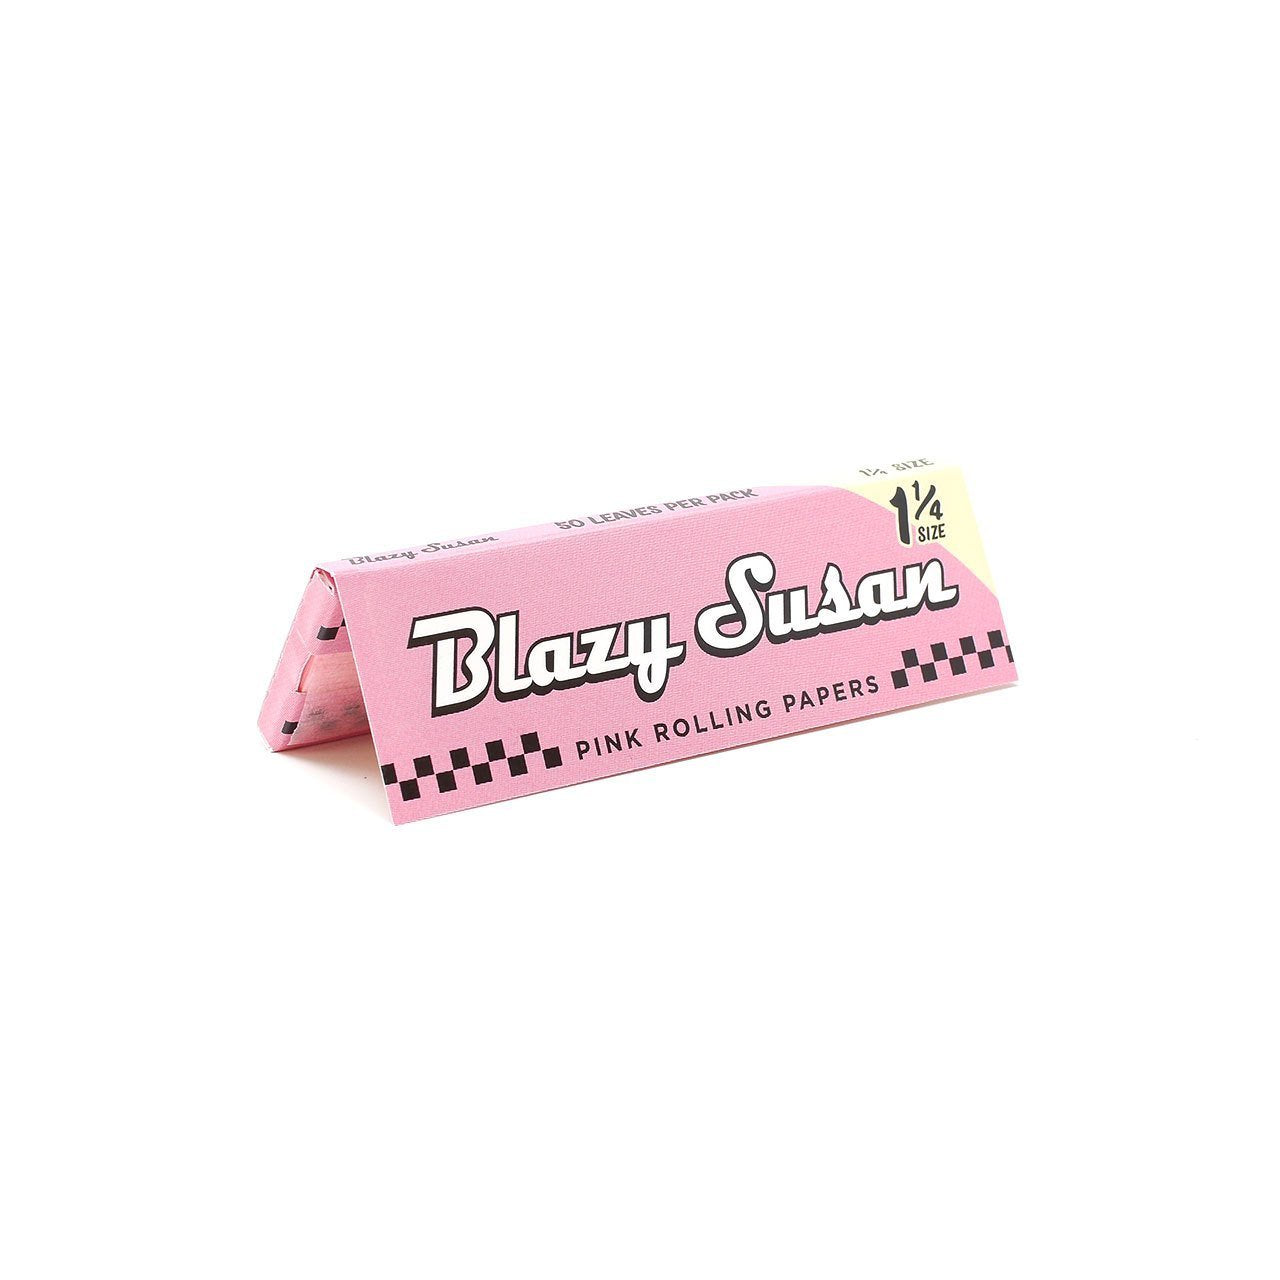 Blazy Susan 1 1/4 Pink rolling Papers. Vancouver Canada